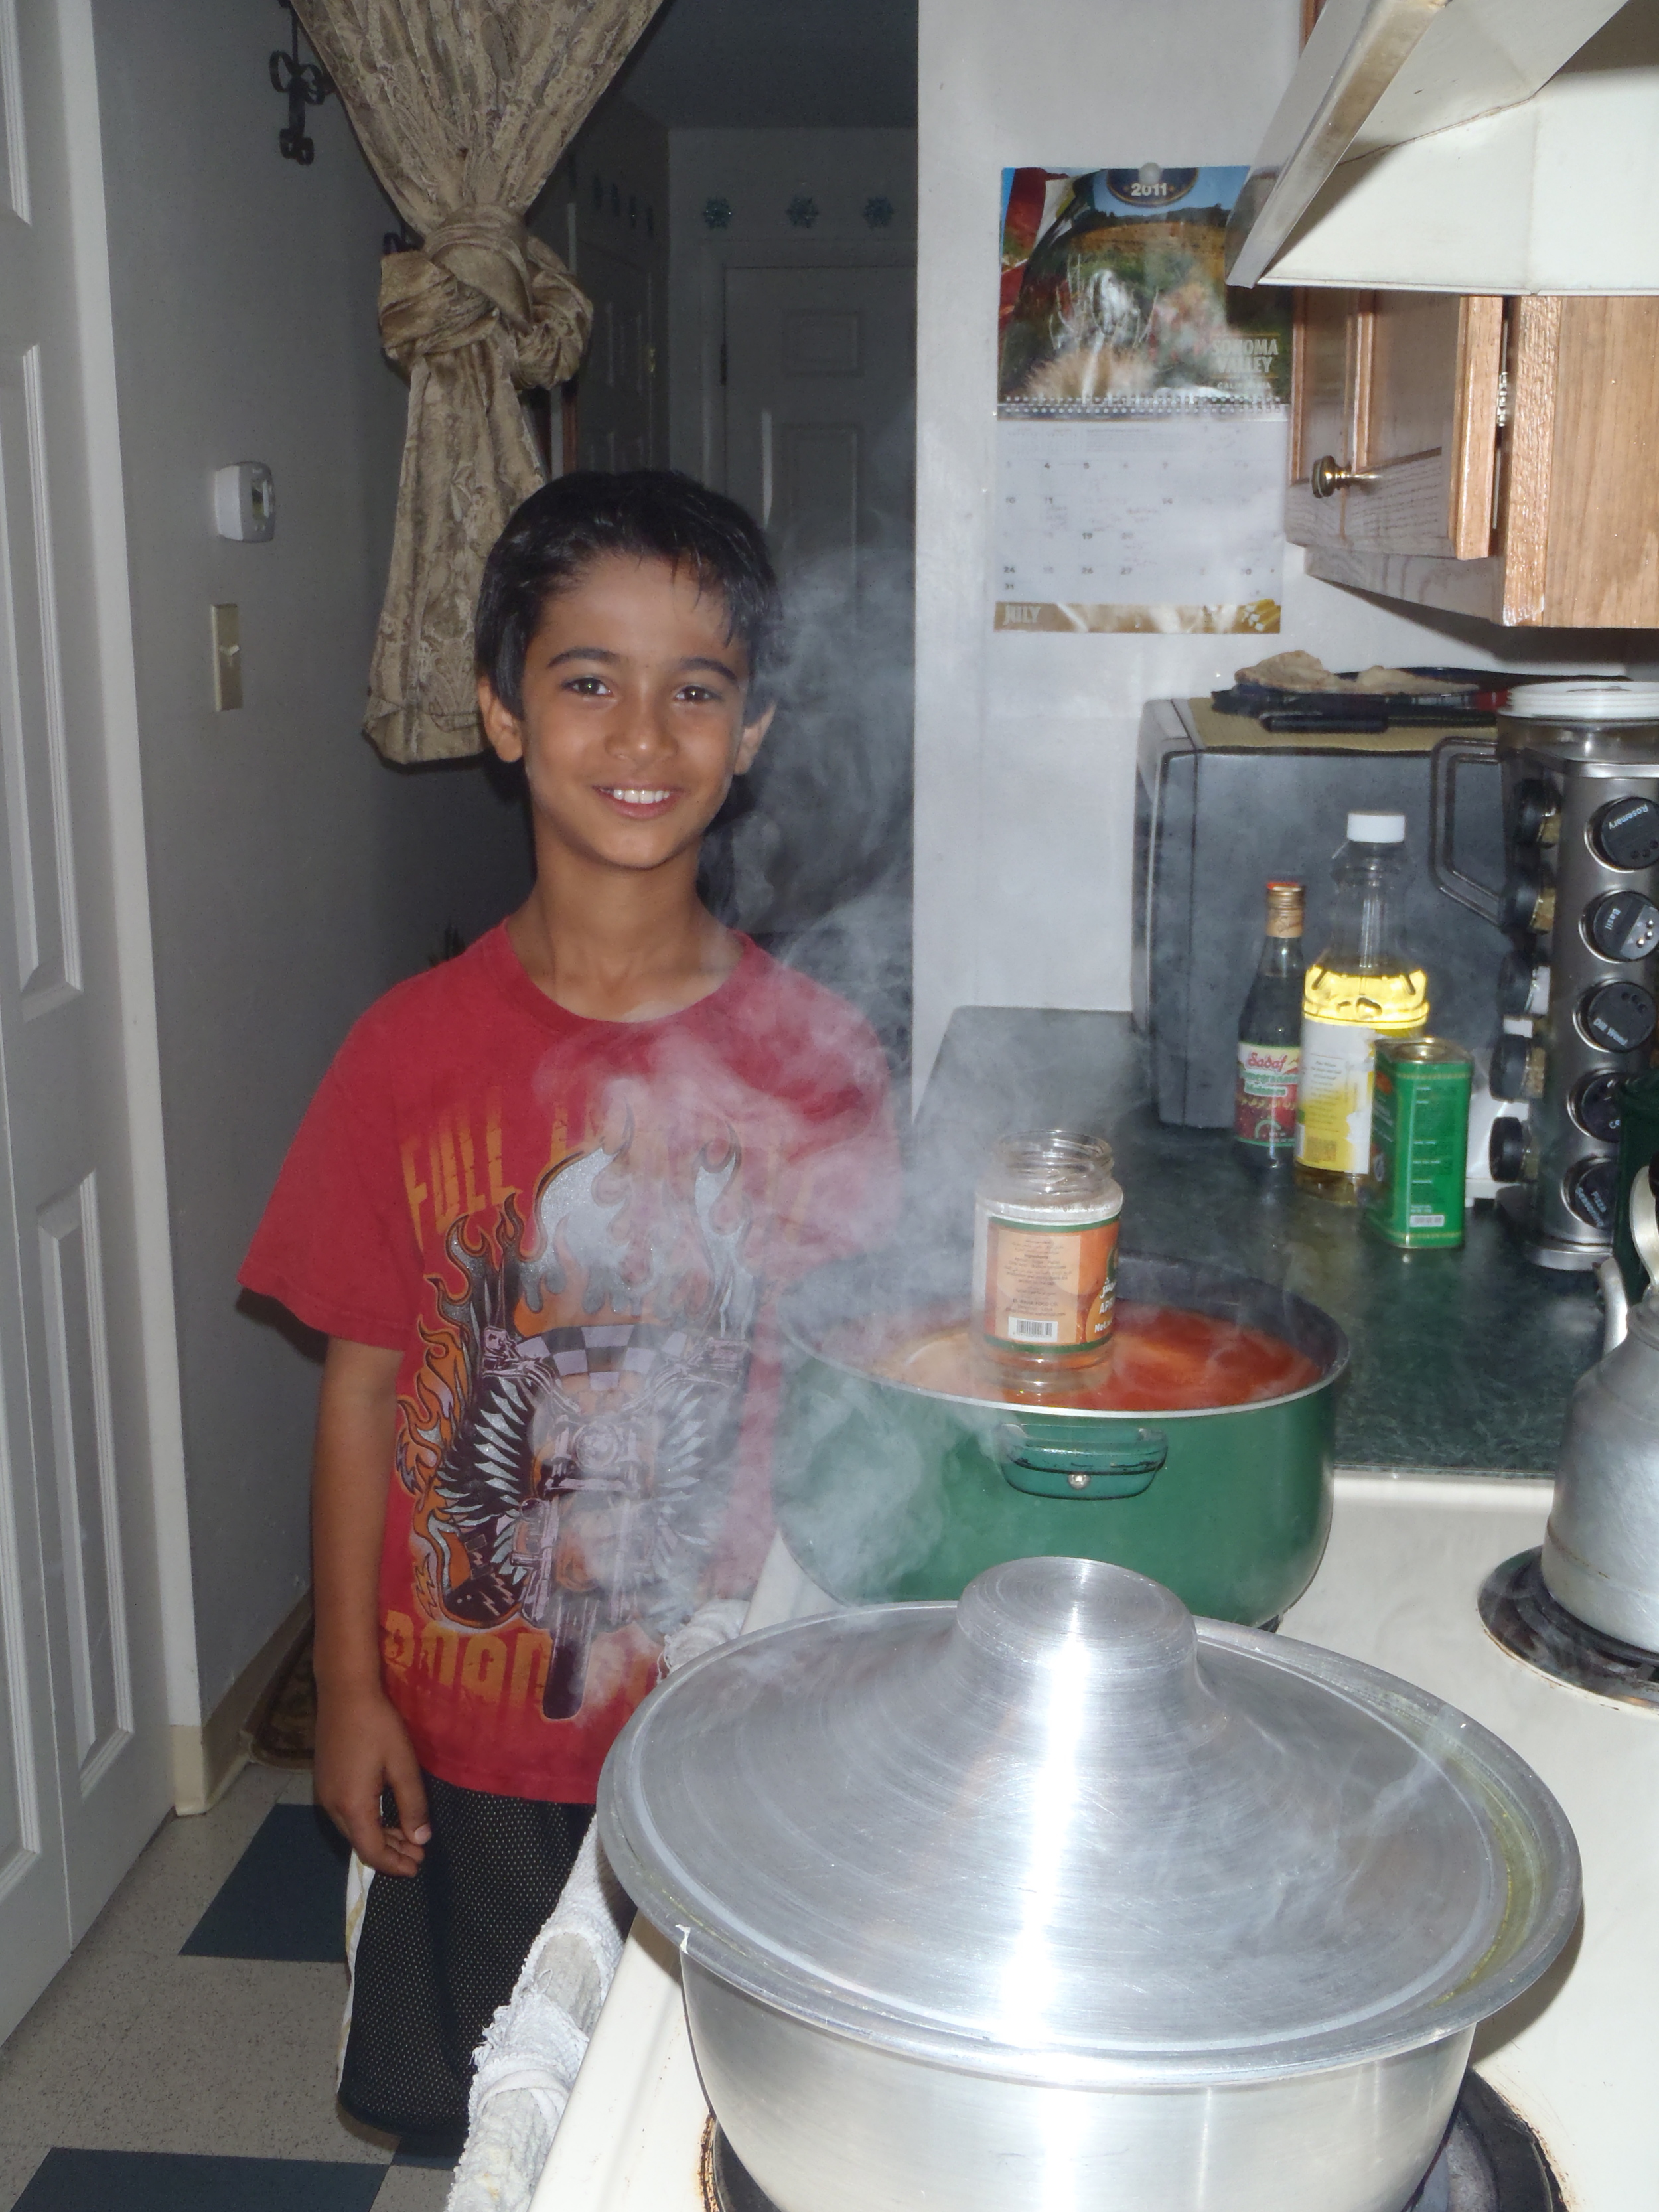   This is Omar, my ten-year-old translator. He was very proud of his mother's cooking.  